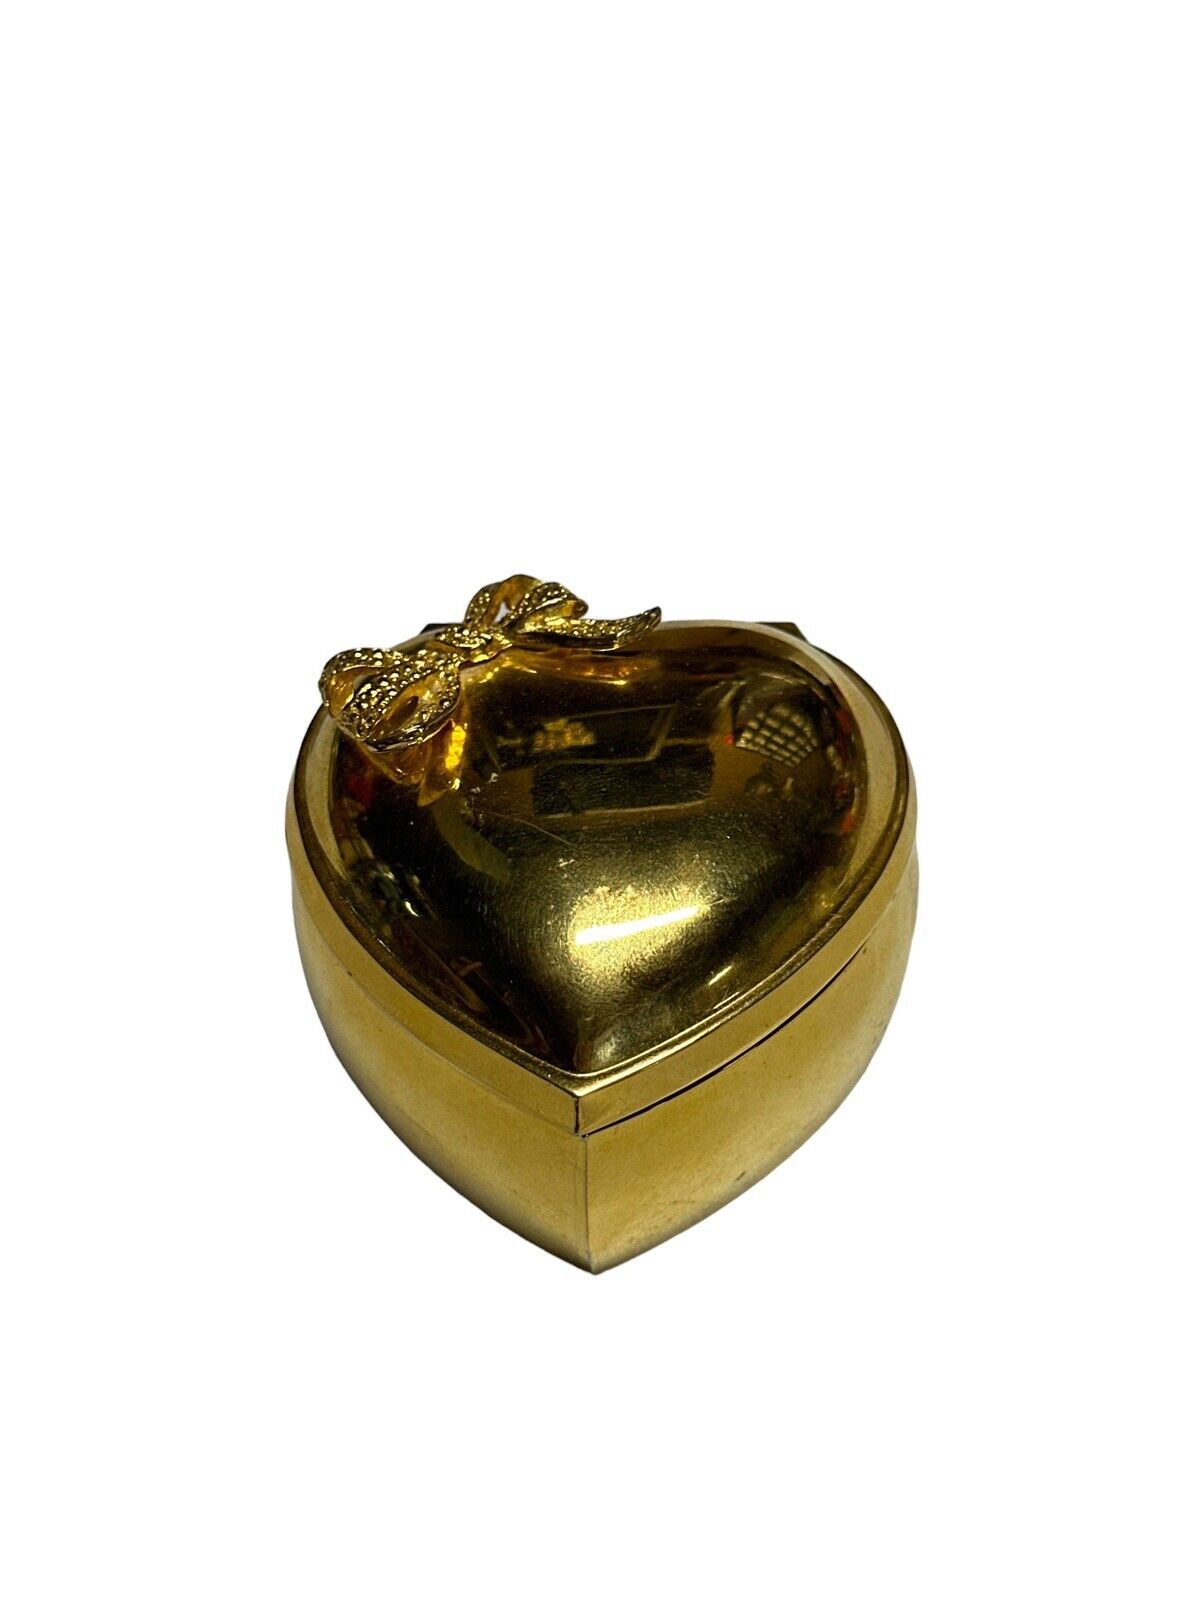 Linden Gold Plated Small Heart Sankyo Music Trinket Box - Plays TESTED